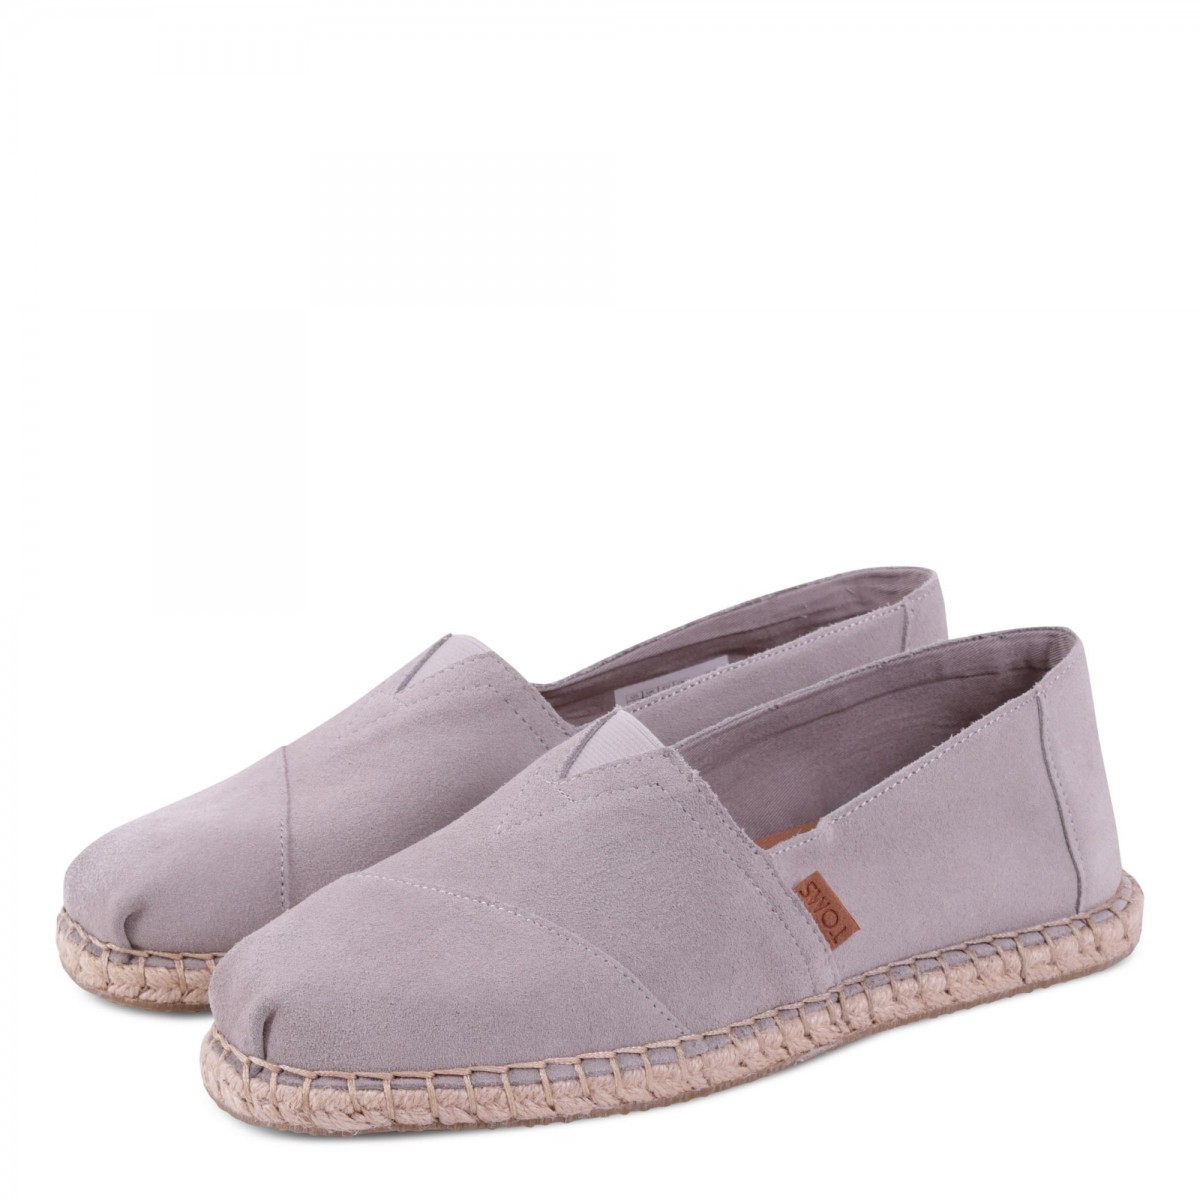 CLASSIC DRIZZLE GREY SUEDE / BLANKET STITCH